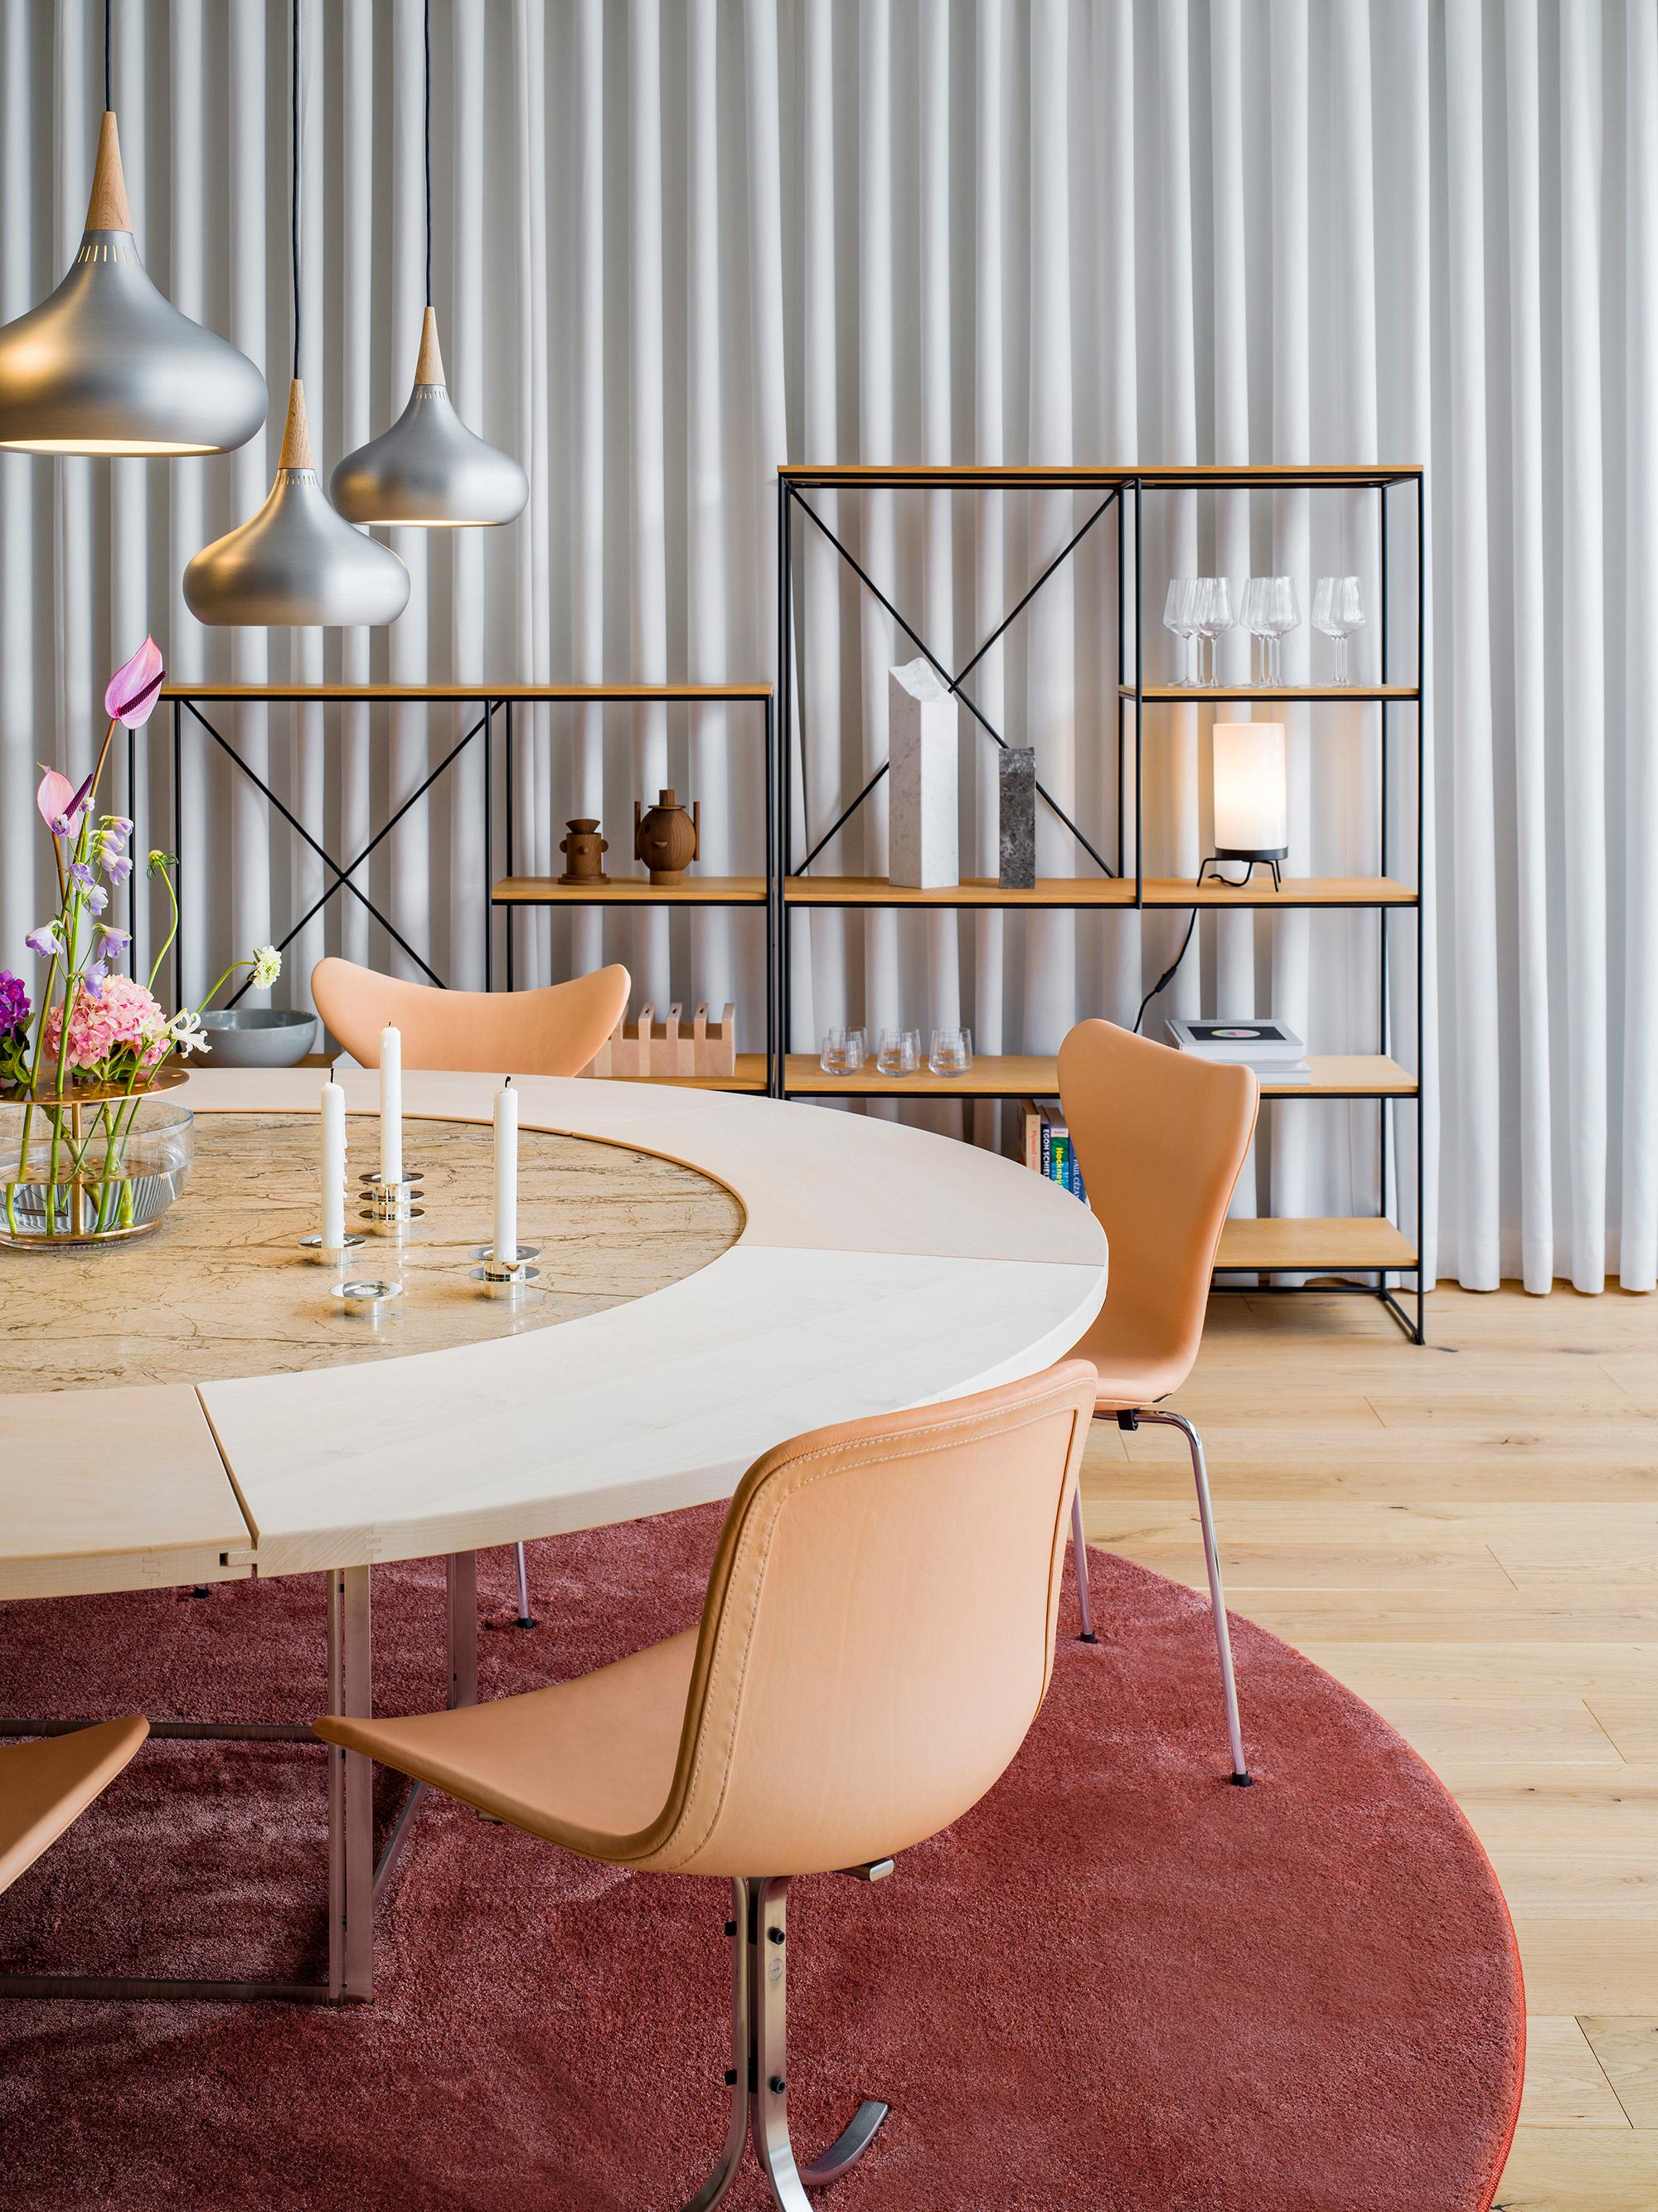 Poul Kjærholm 'PK9' Dining Chair for Fritz Hansen in Leather (Cat. 5).

Established in 1872, Fritz Hansen has become synonymous with legendary Danish design. Combining timeless craftsmanship with an emphasis on sustainability, the brand’s